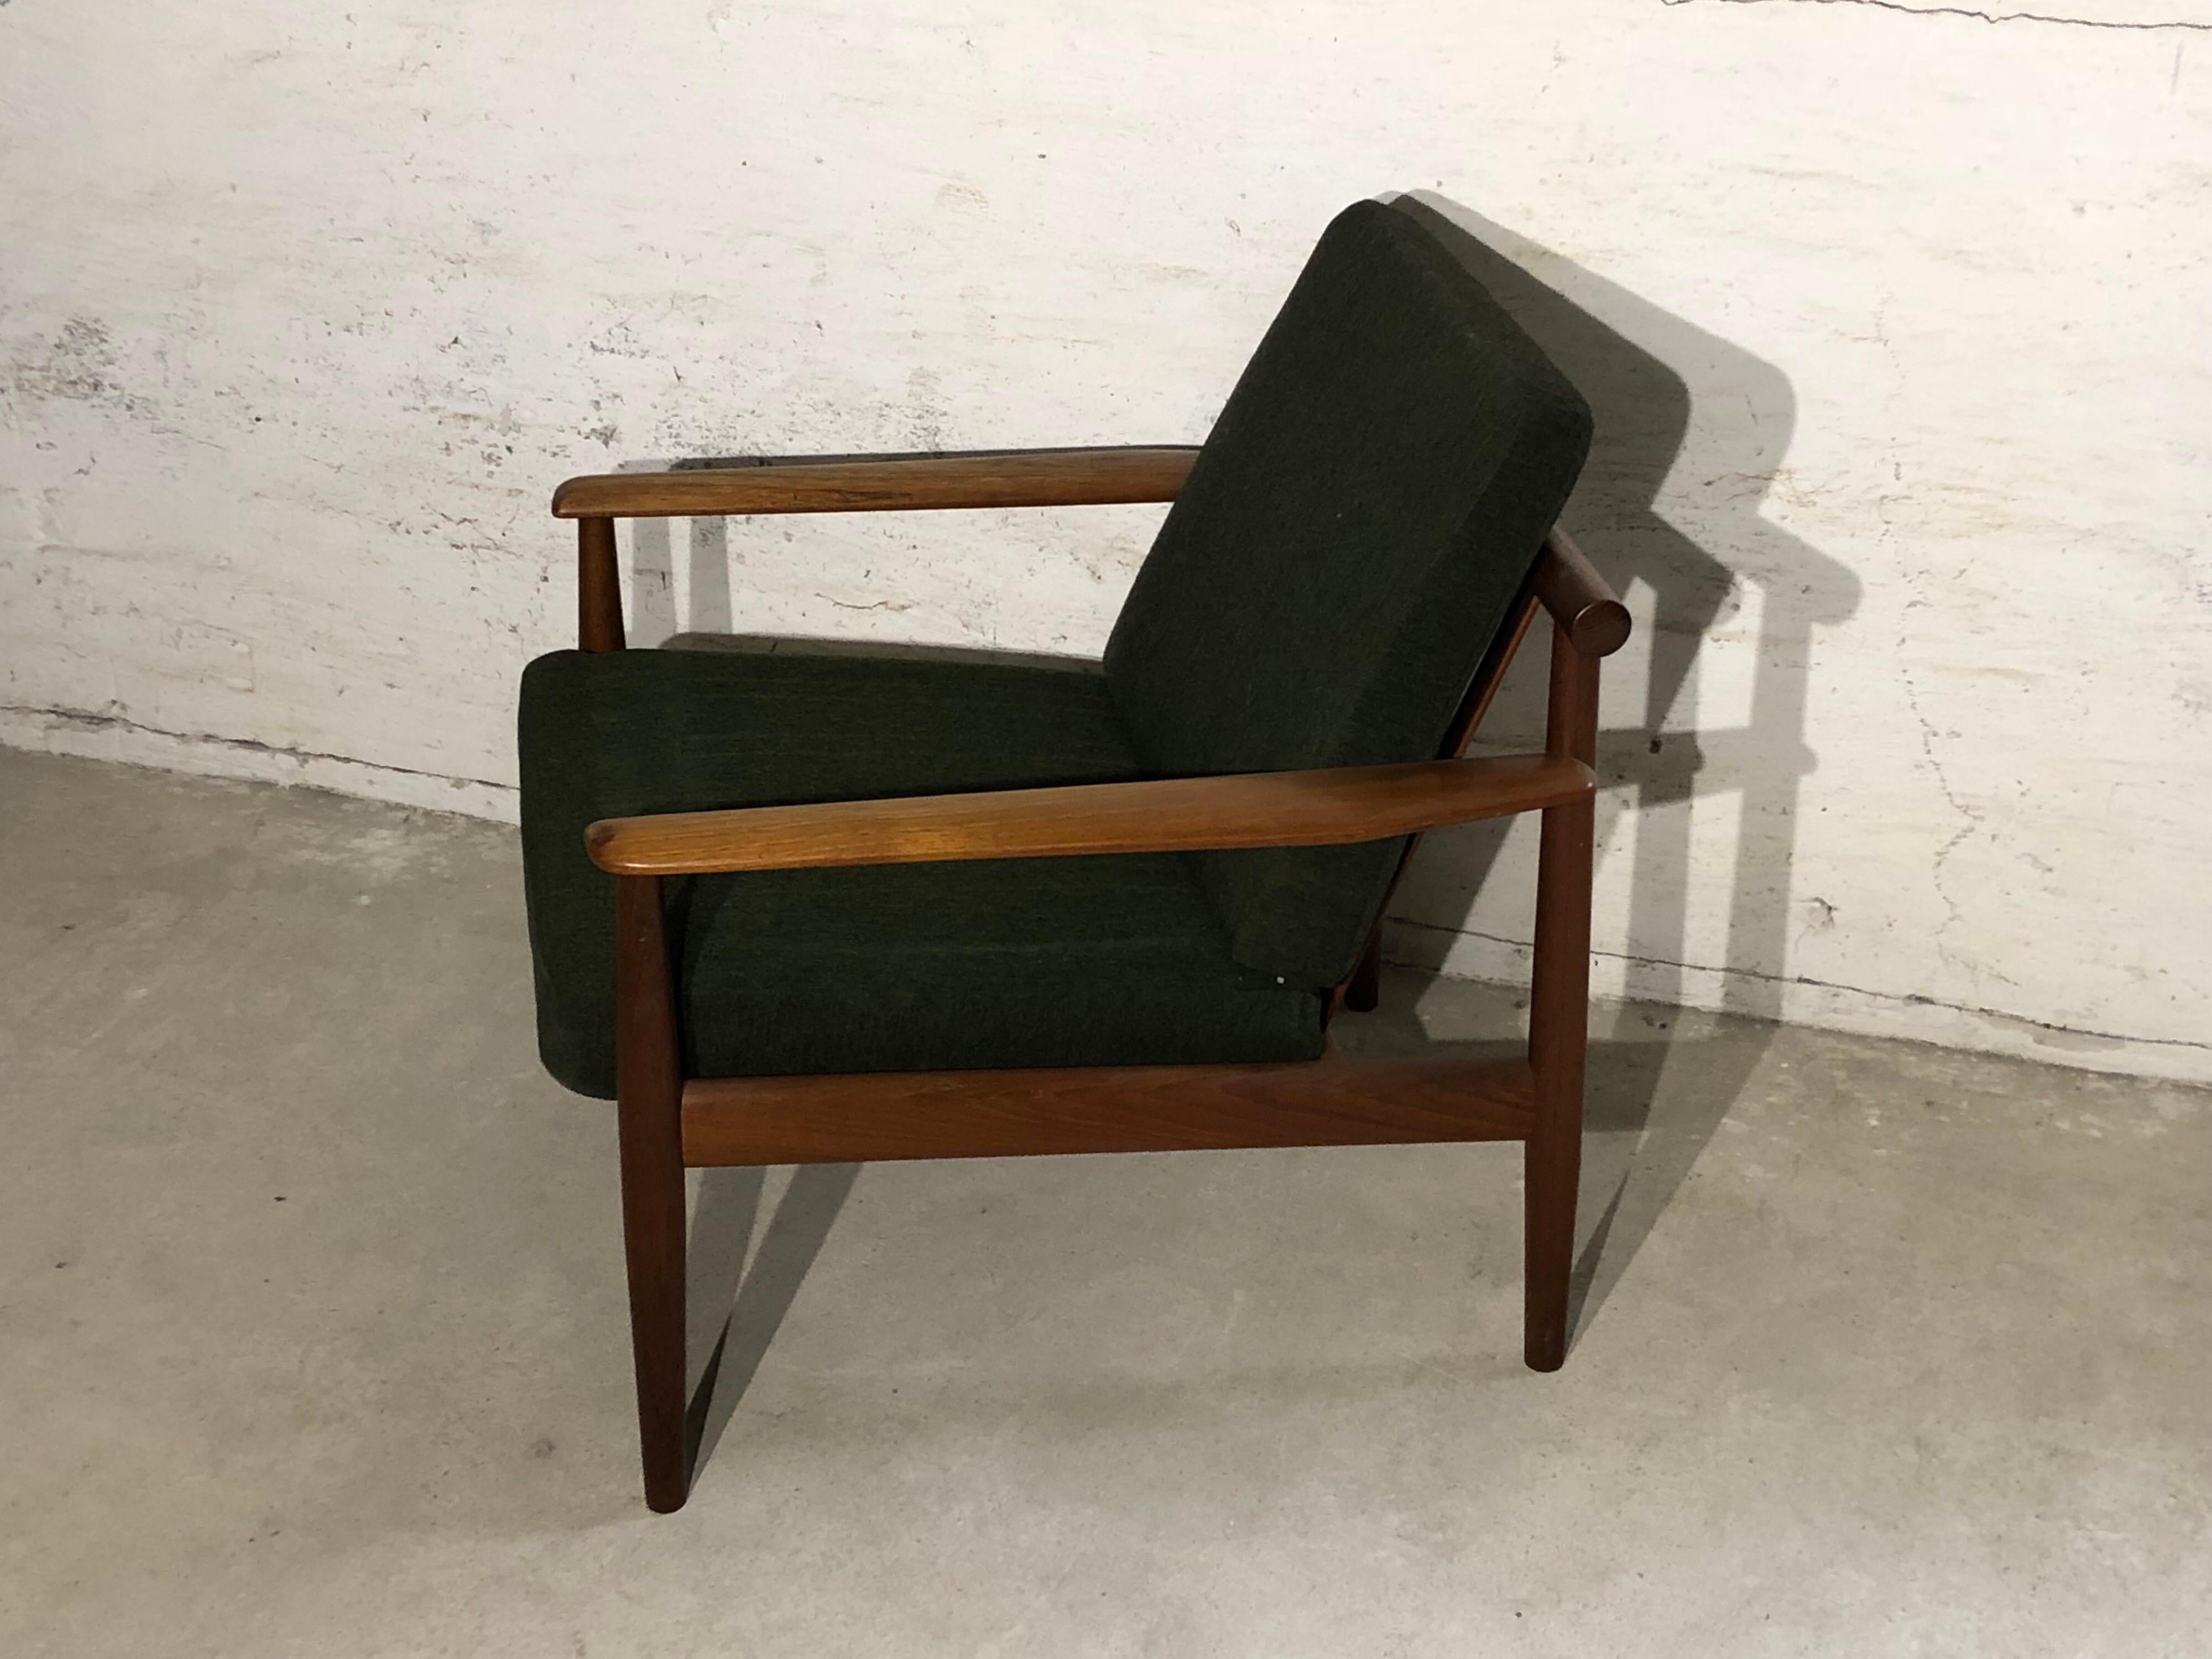 Rare lounge chair in teak designed by Grete Jalk in the 1950s. Upholstery in dark green wool. 
It is in a very good condition, but the fabrics has light marks.